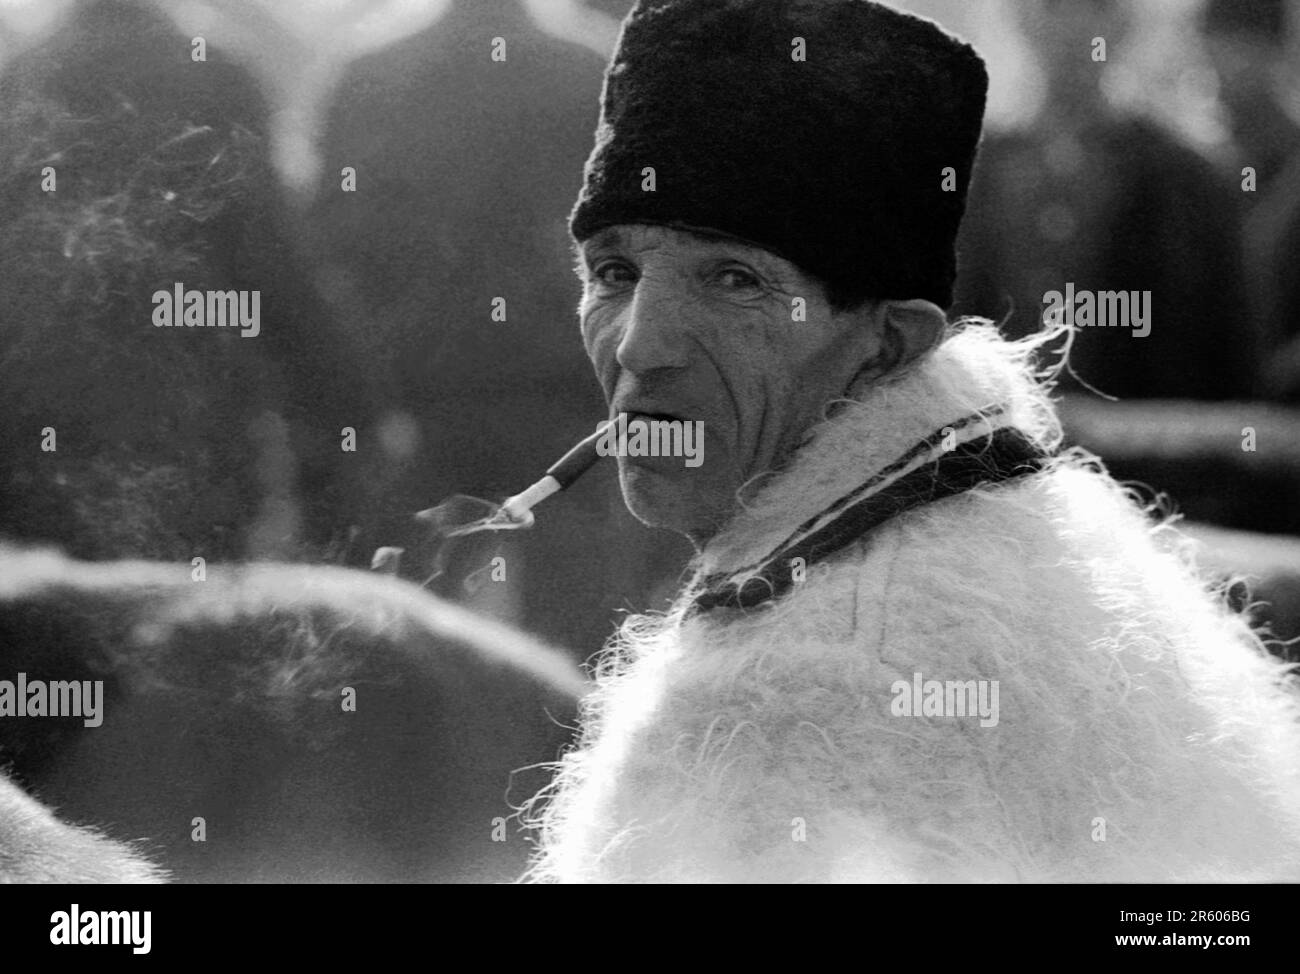 Maramures, Romania, approx. 1976. Local man in traditional woolen hat and coat, smoking a cigarette with a disposable filter. Stock Photo